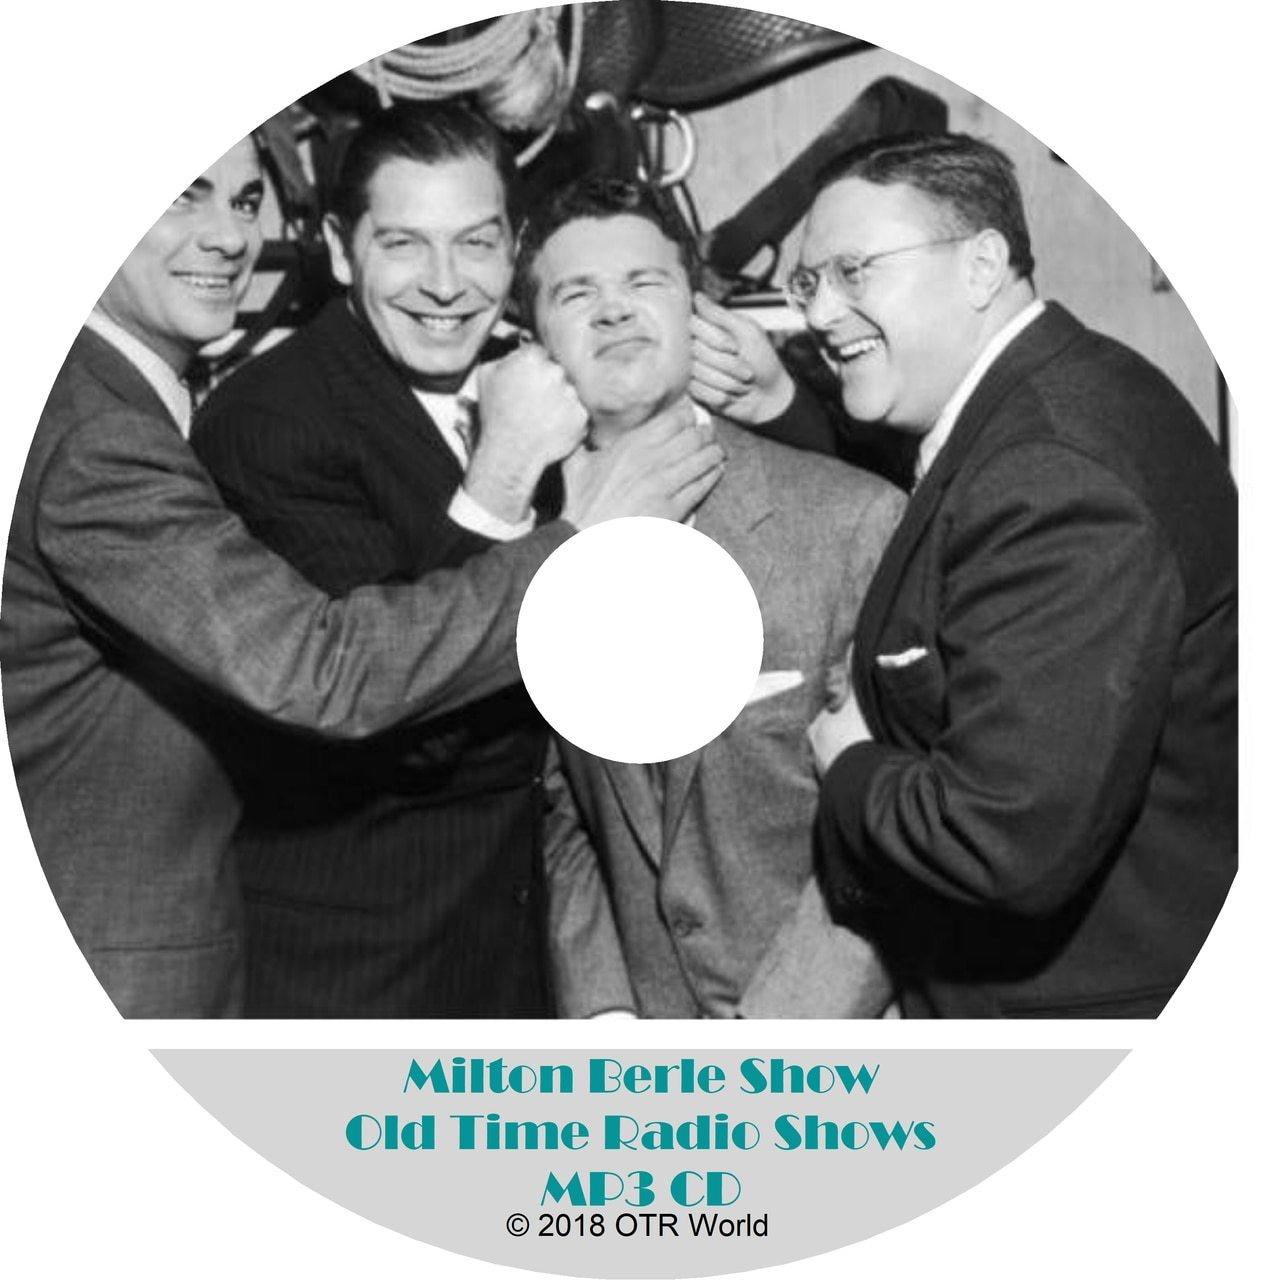 The Milton Berle Show Old Time Radio Shows 44 Episodes On MP3 CD - OTR World